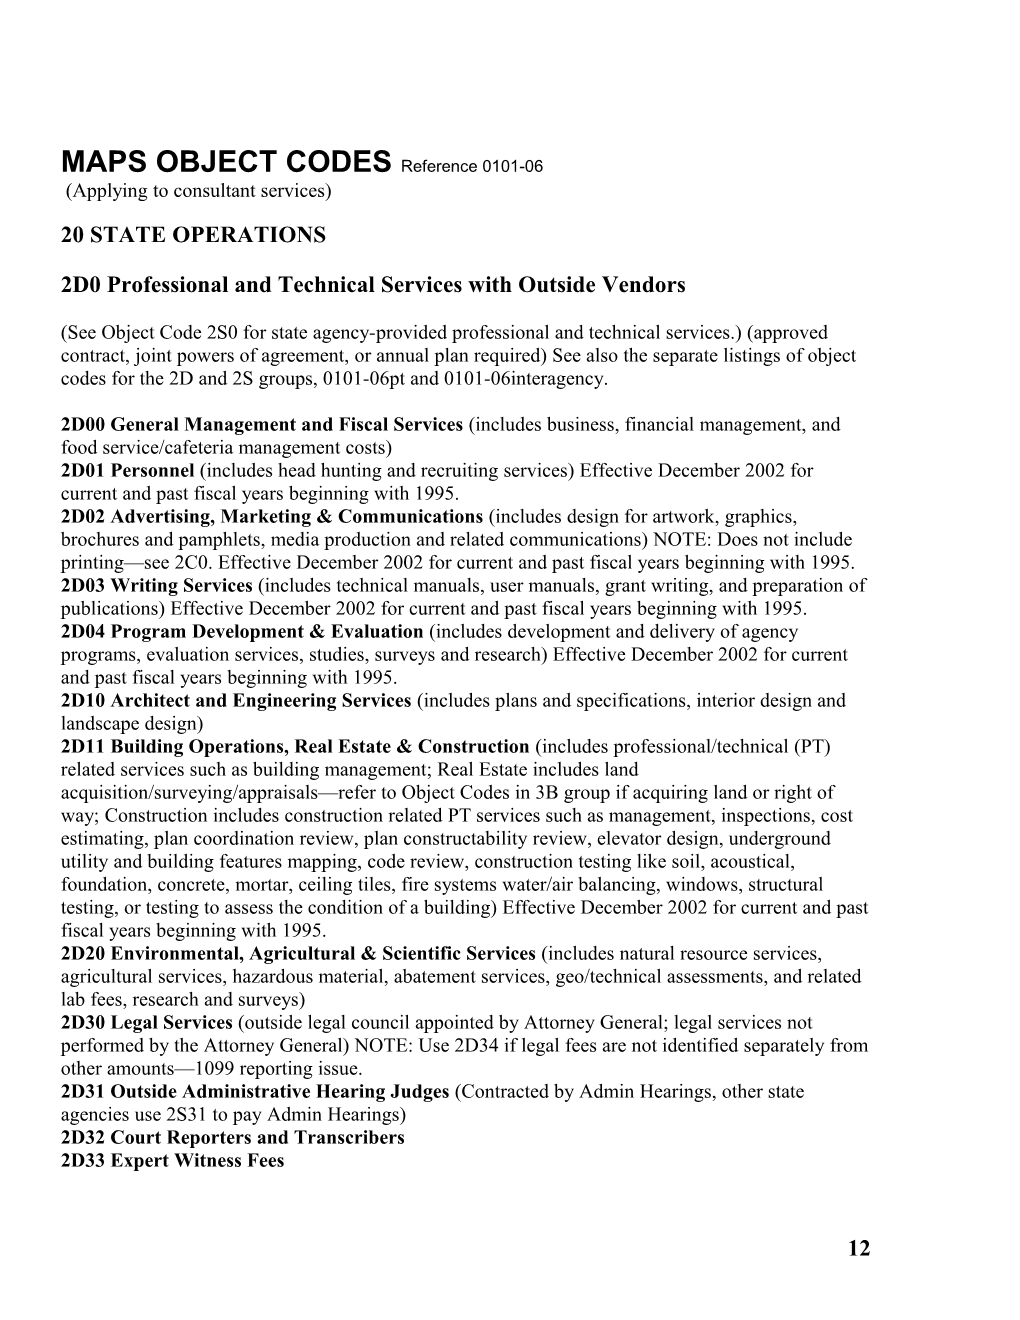 MAPS OBJECT CODES Reference 0101-06